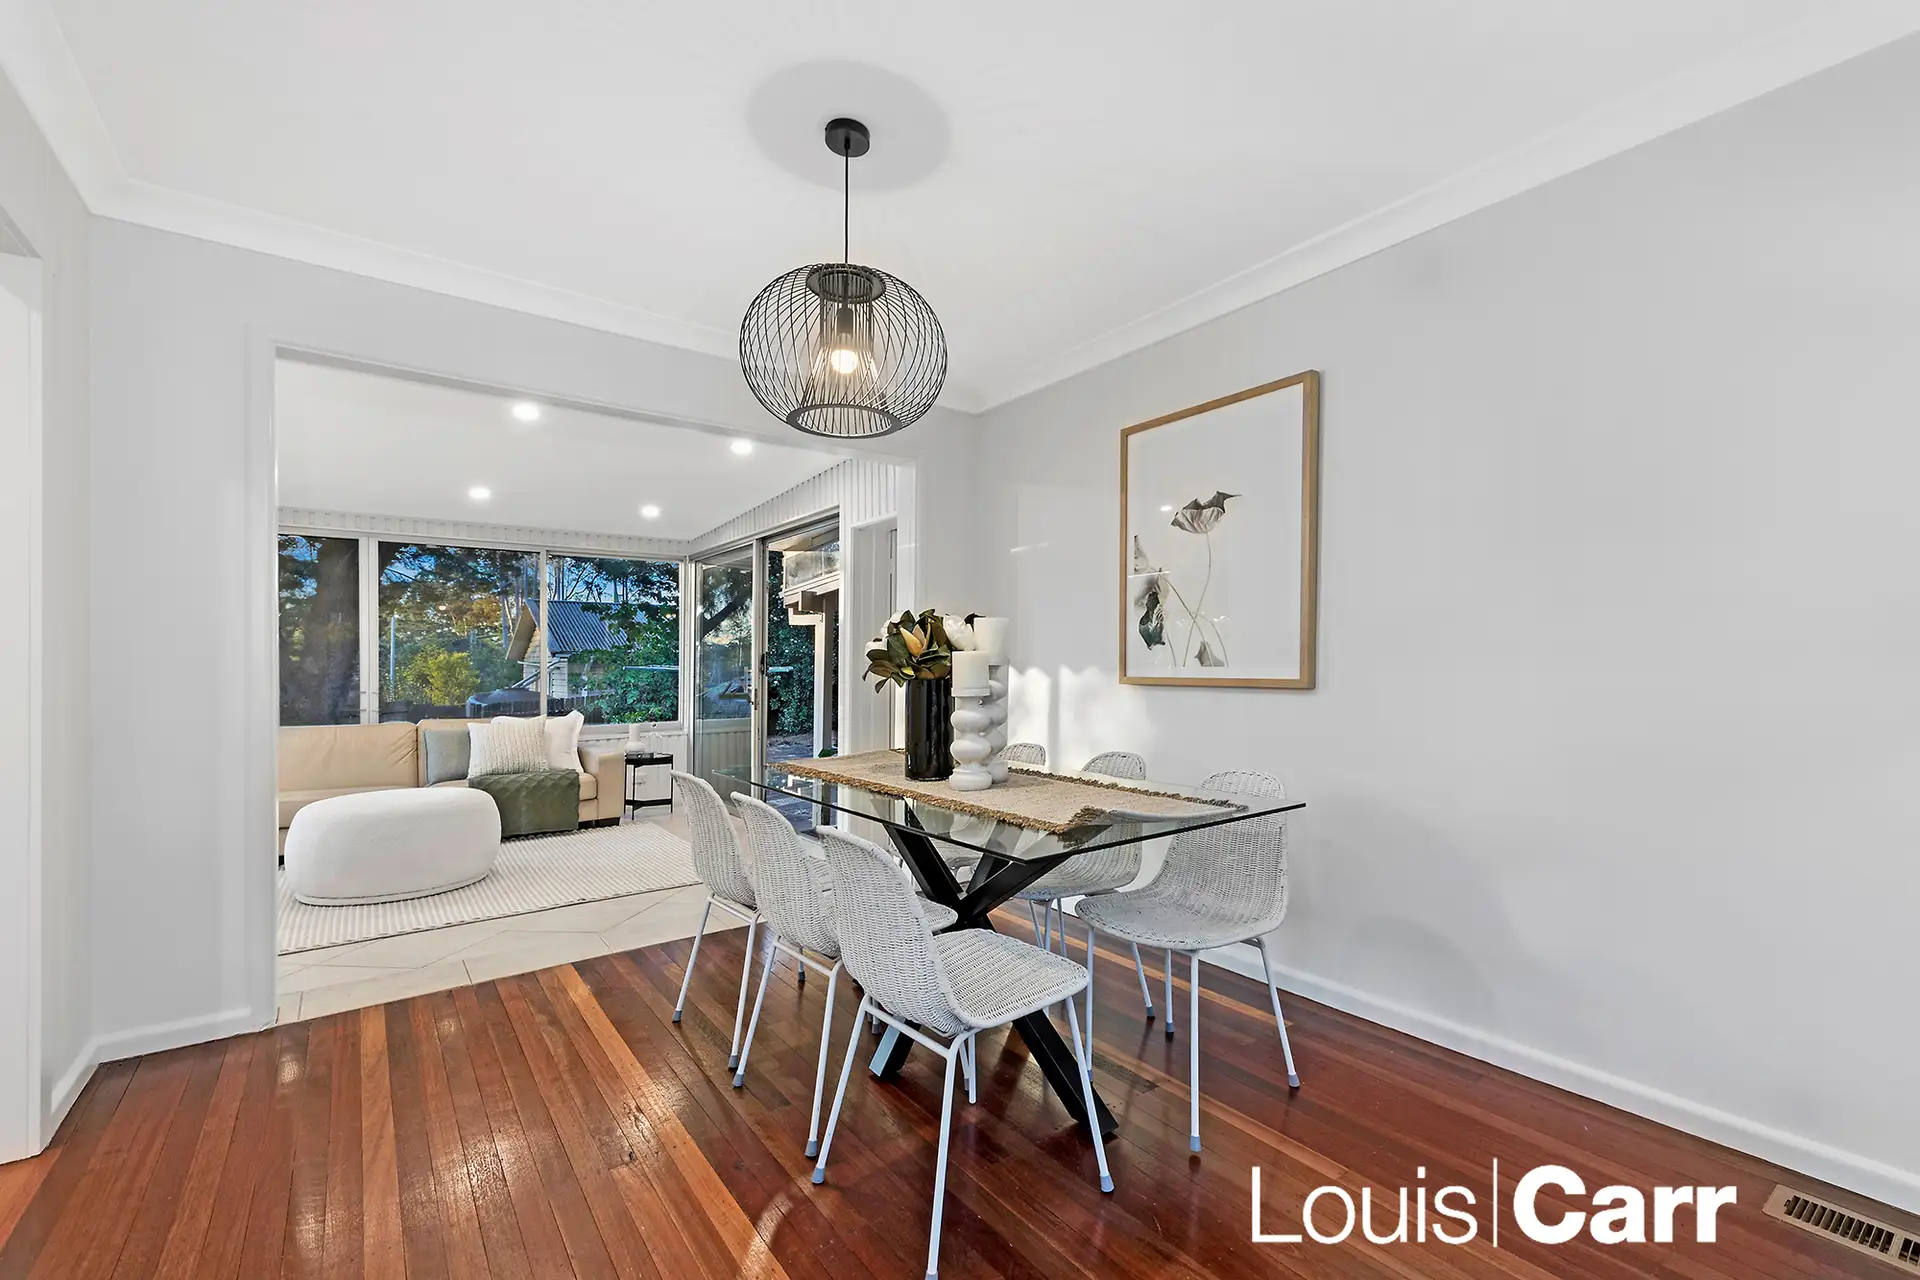 Photo #6: 4 Valda Street, West Pennant Hills - Sold by Louis Carr Real Estate